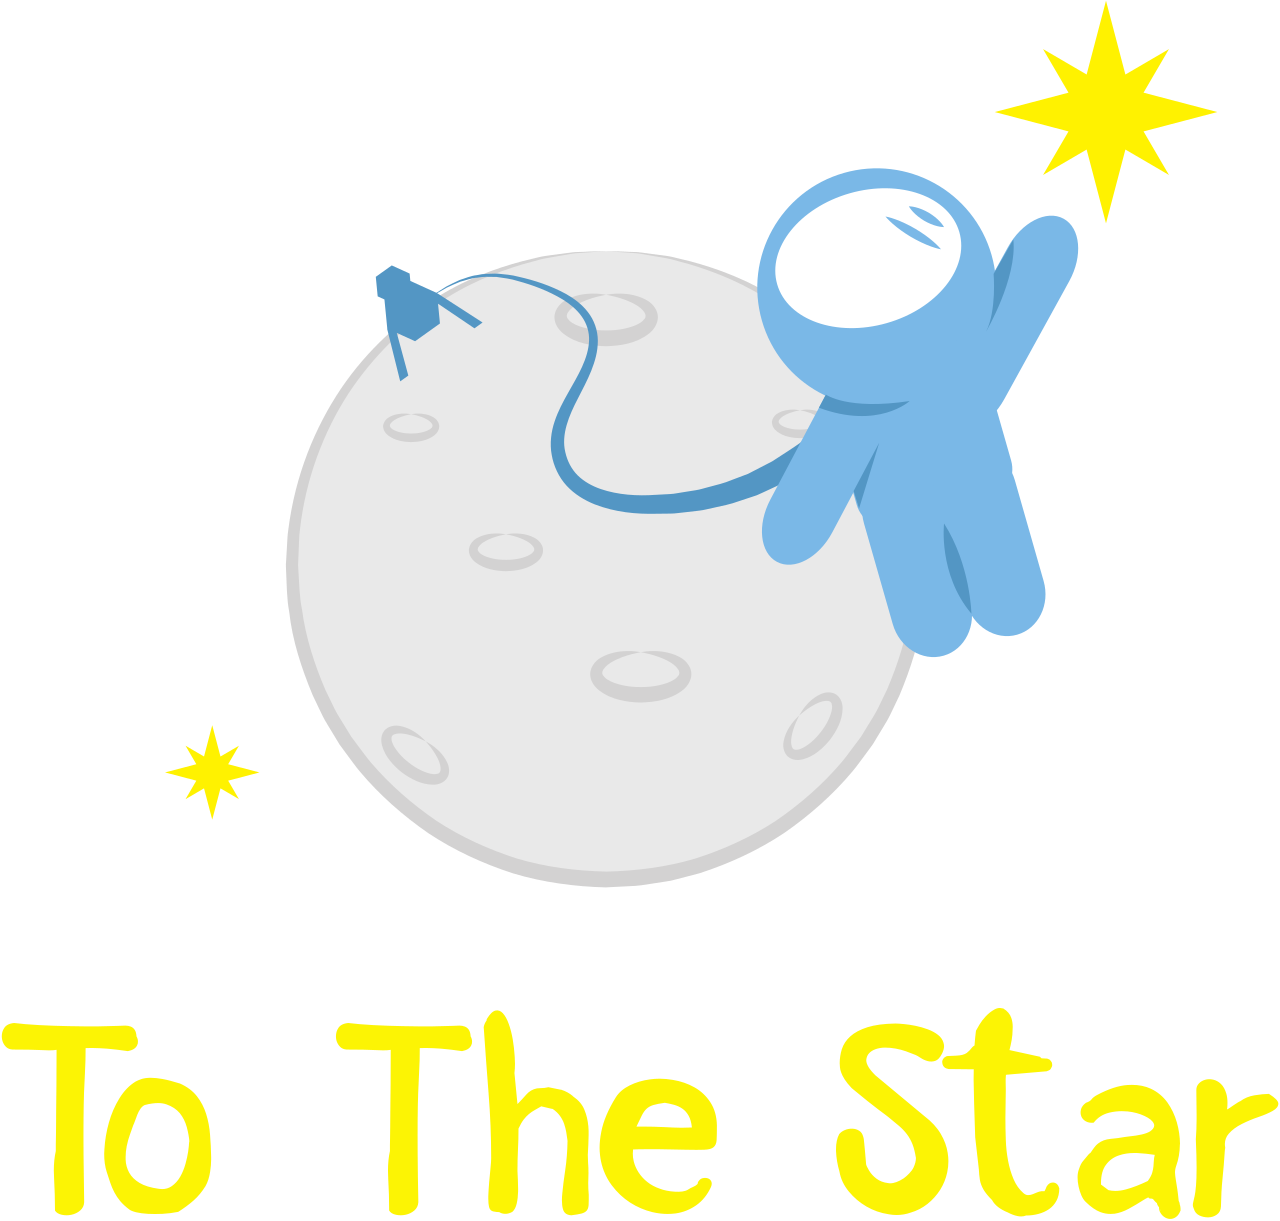 To The Star's logo